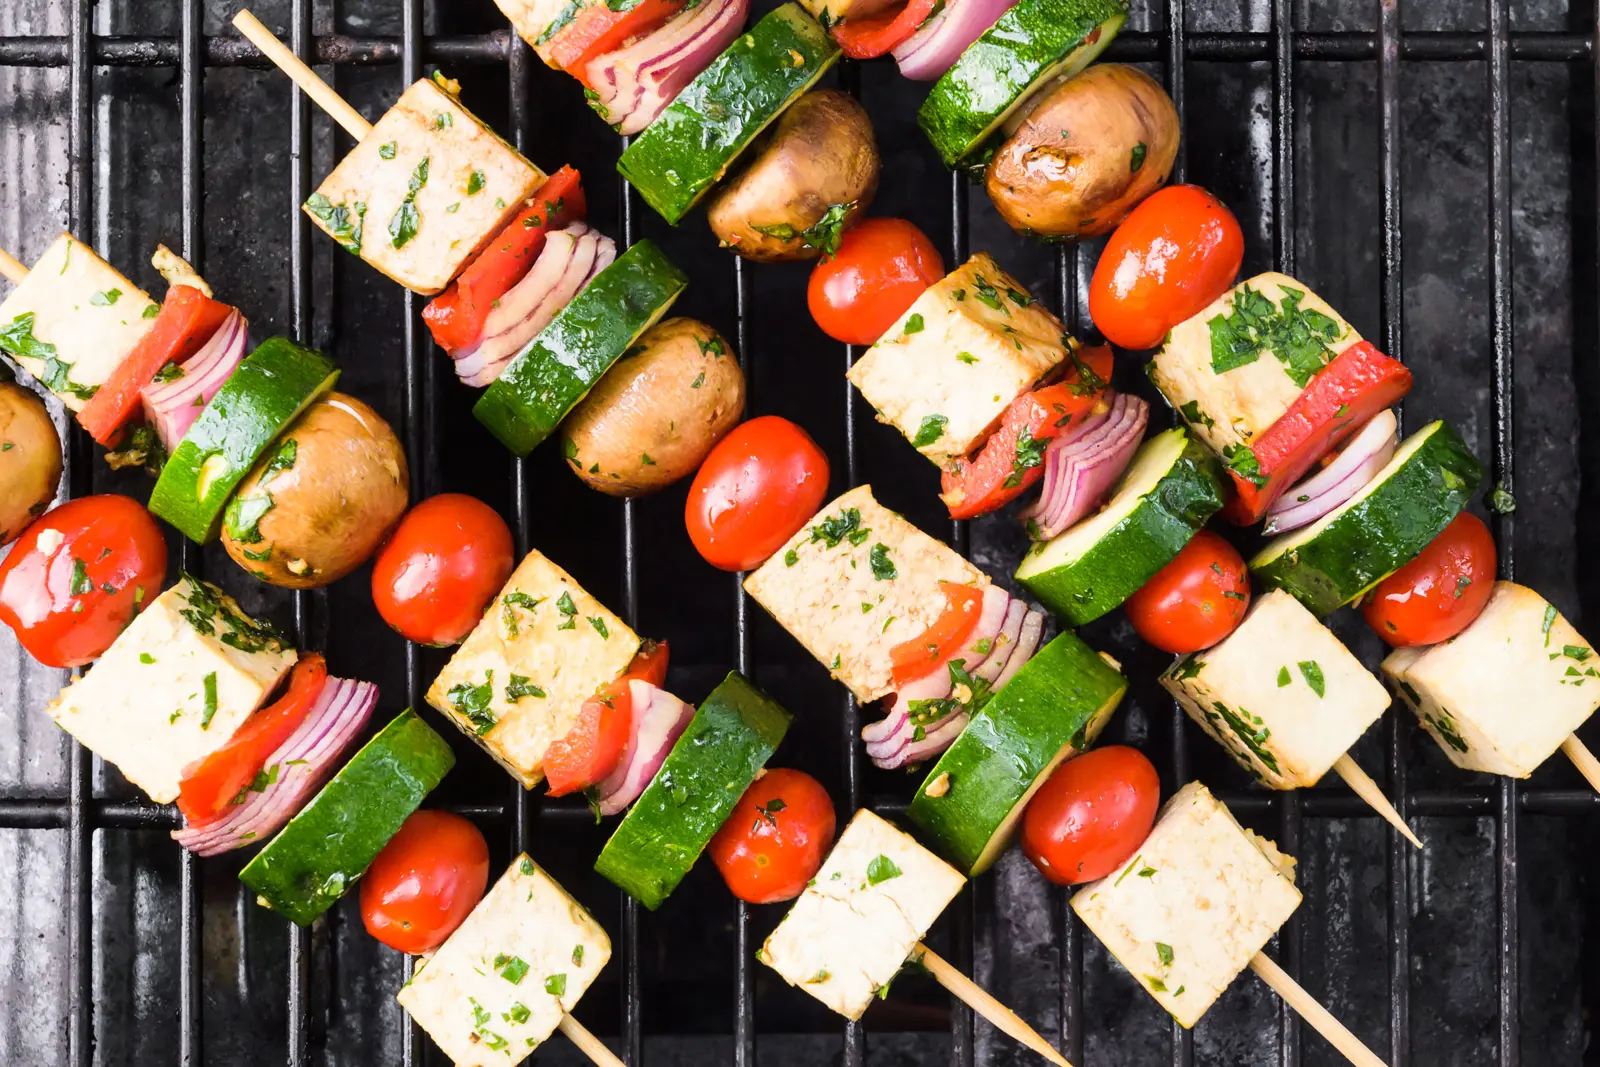 Looking down on vegan skewers on the grill. There are tofu cubes, sliced zucchini, cherry tomatoes, and more.